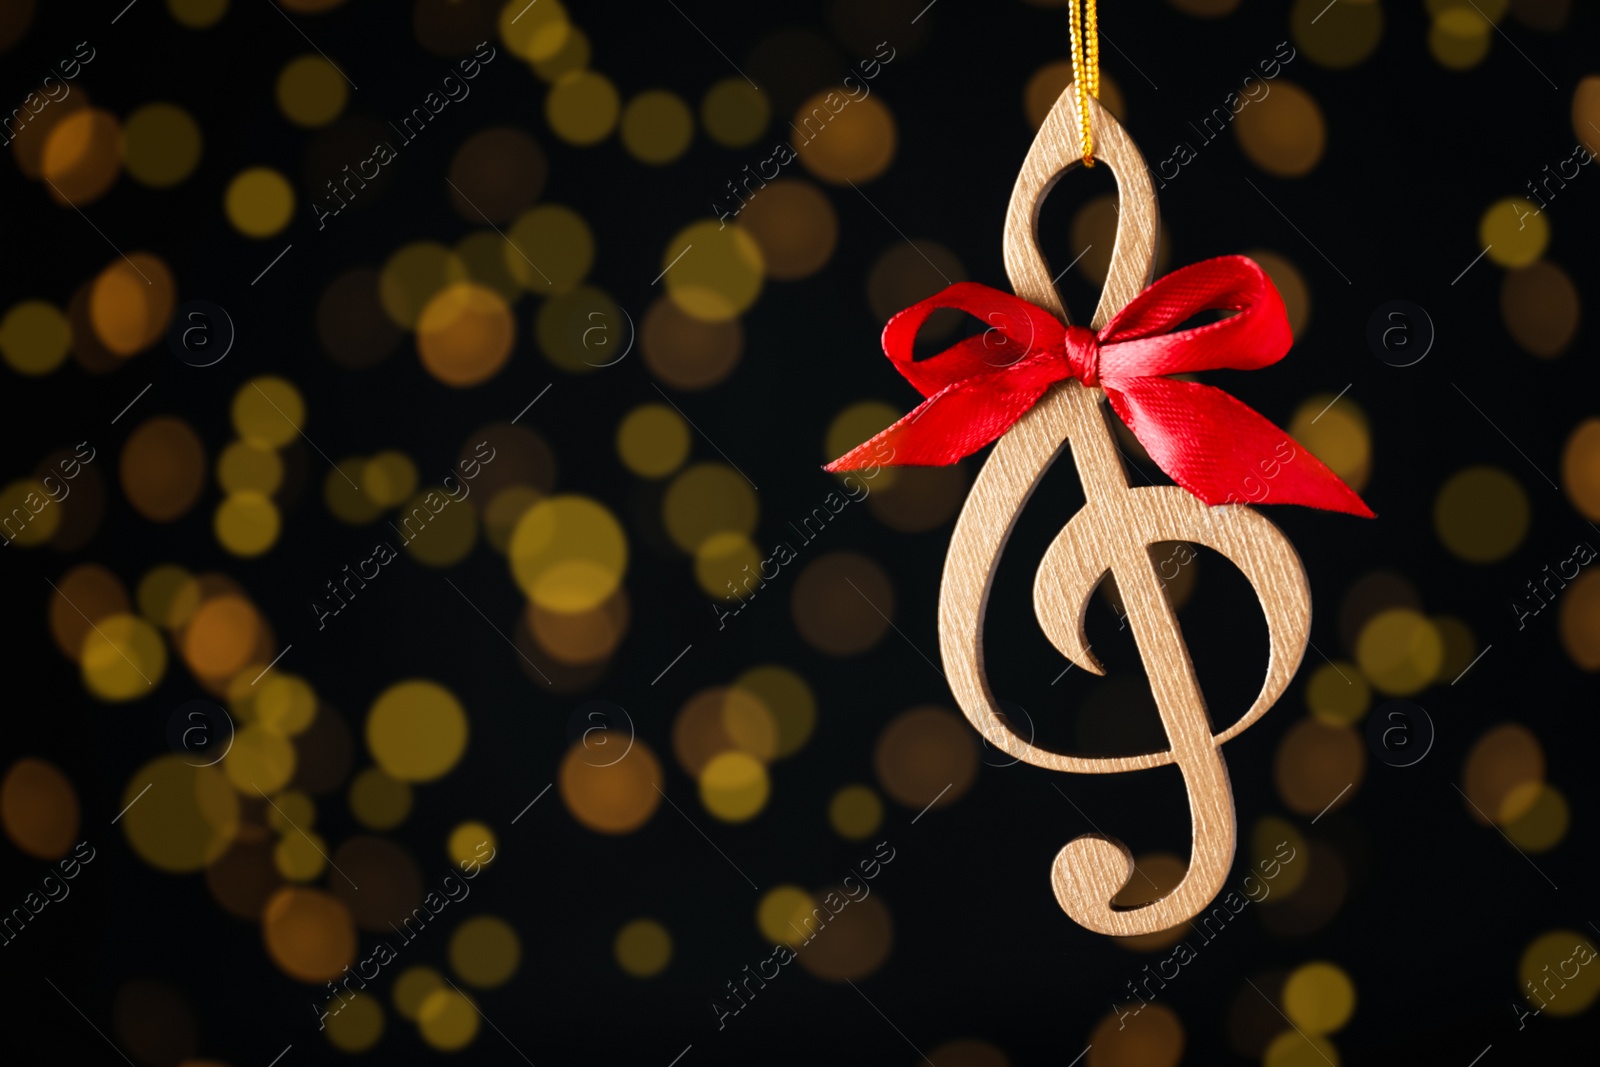 Photo of Wooden music note with red bow hanging on black background with blurred Christmas lights. Space for text